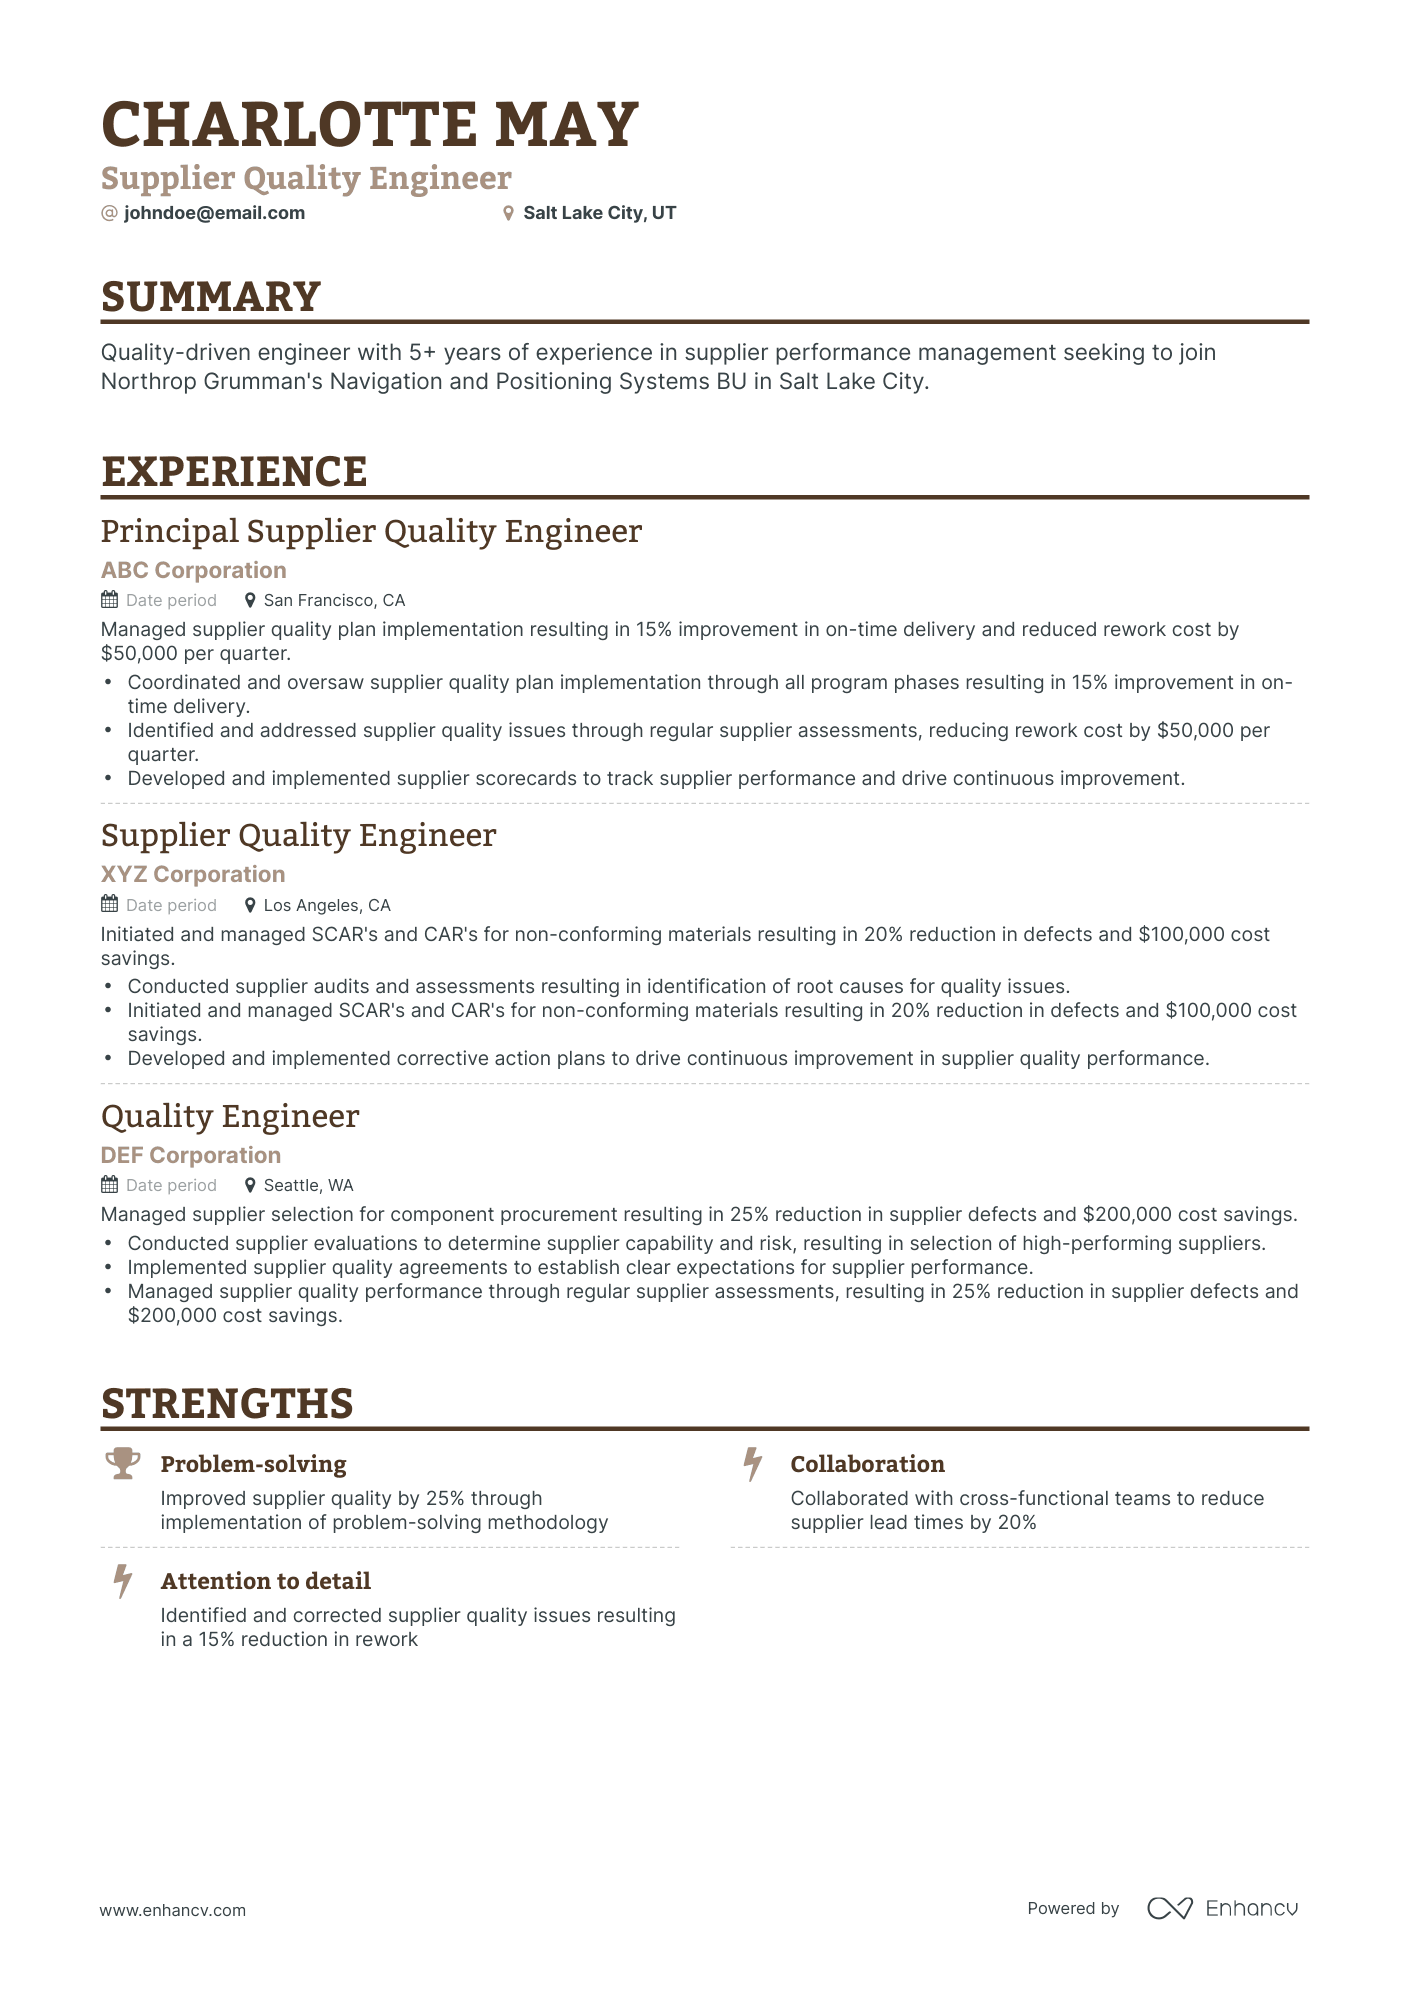 Classic Supplier Quality Engineer Resume Template